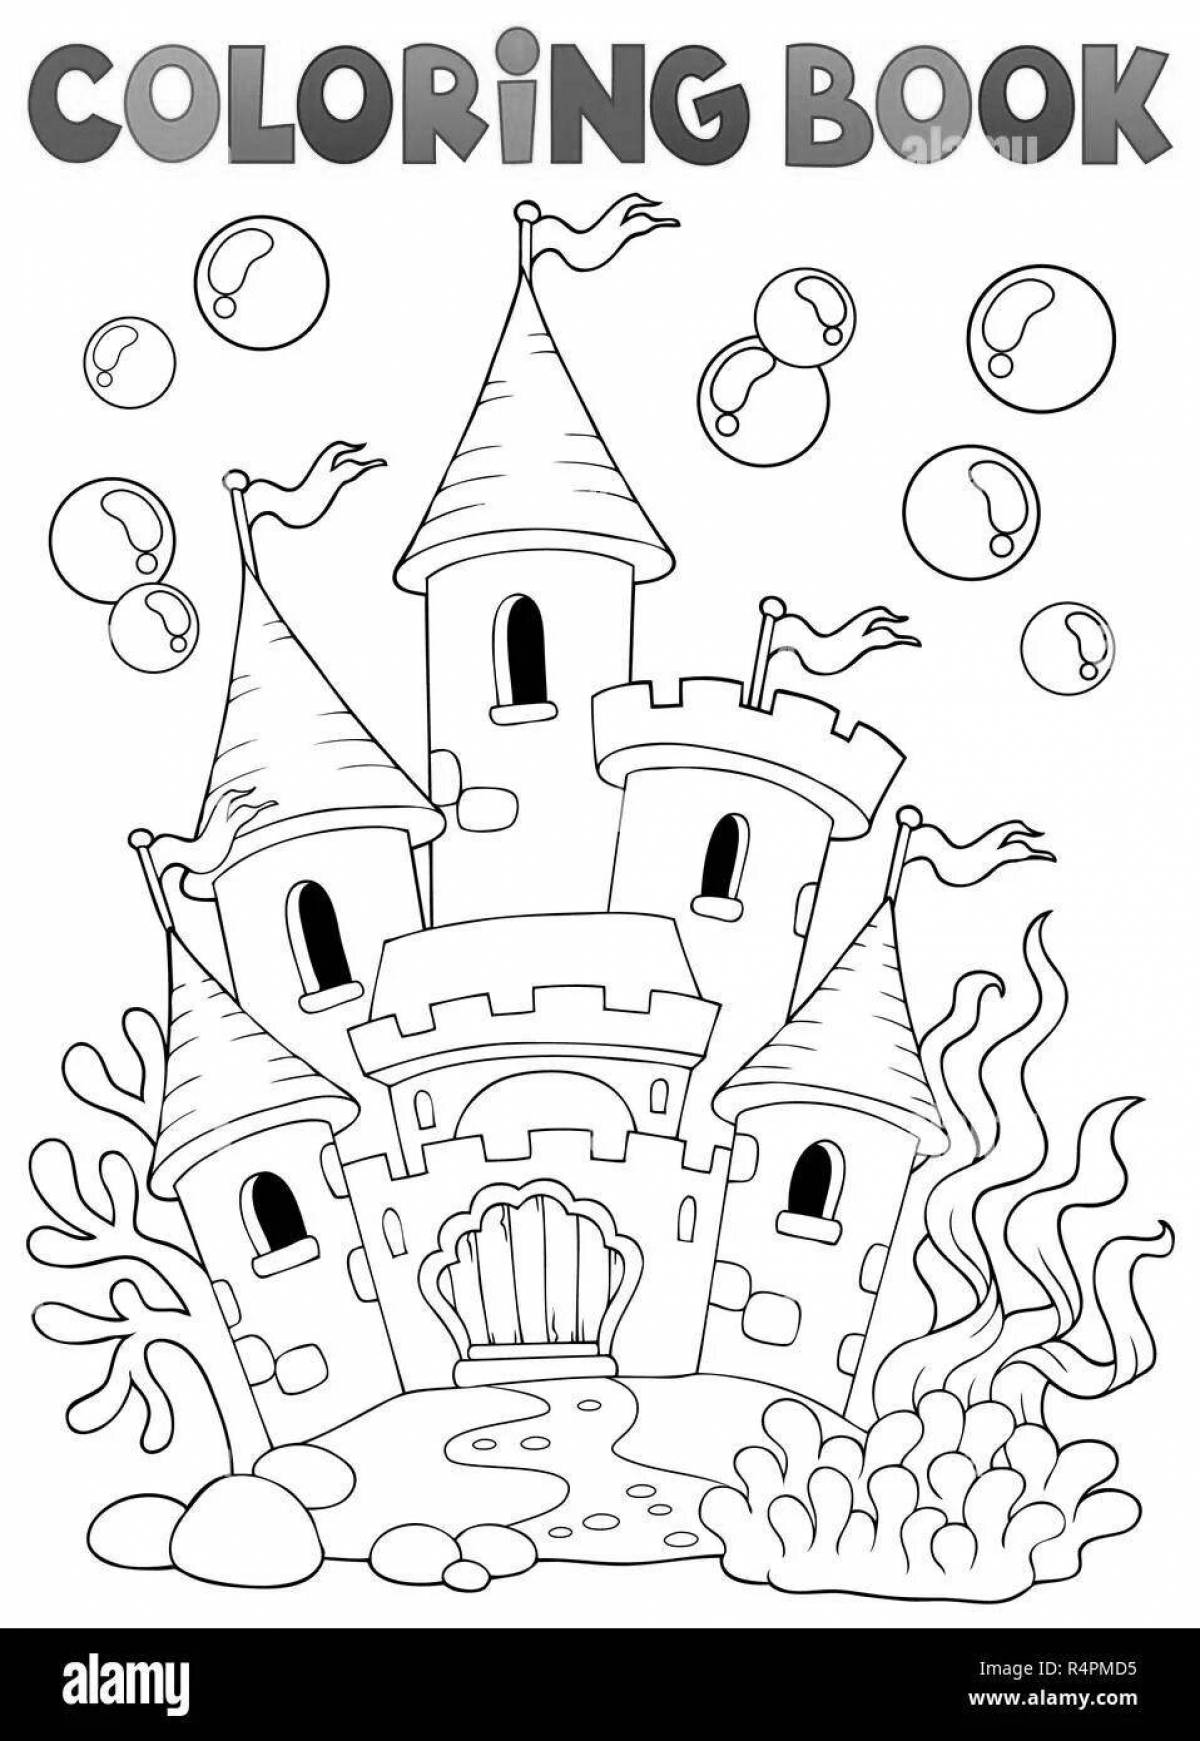 Coloring fairytale kingdom for kids